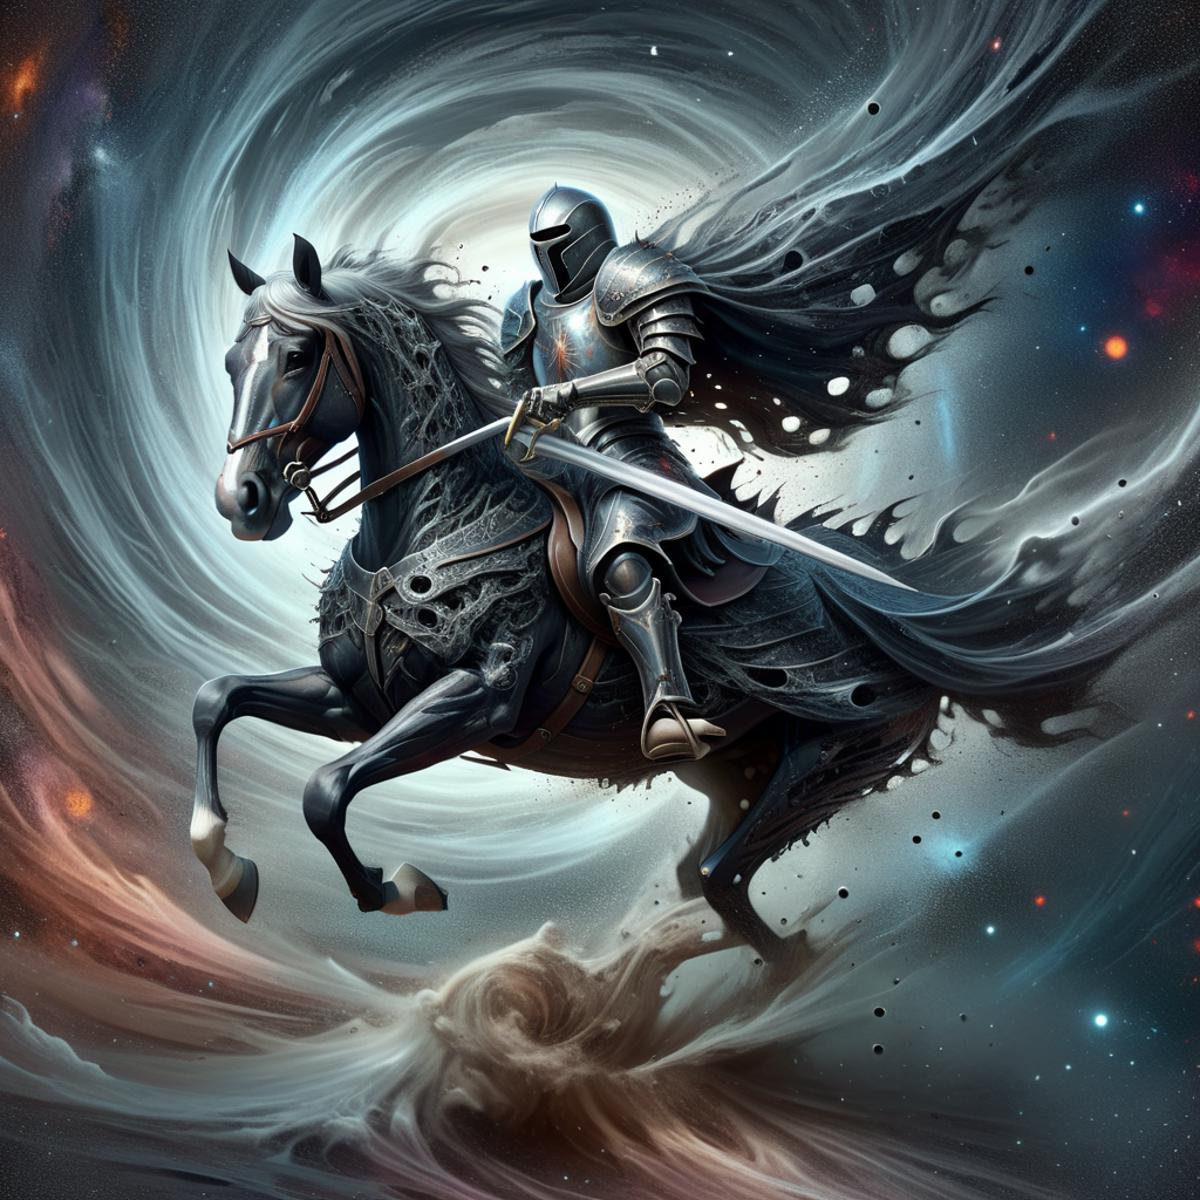 A knight in armor riding a black horse with white feet, possibly a warhorse.